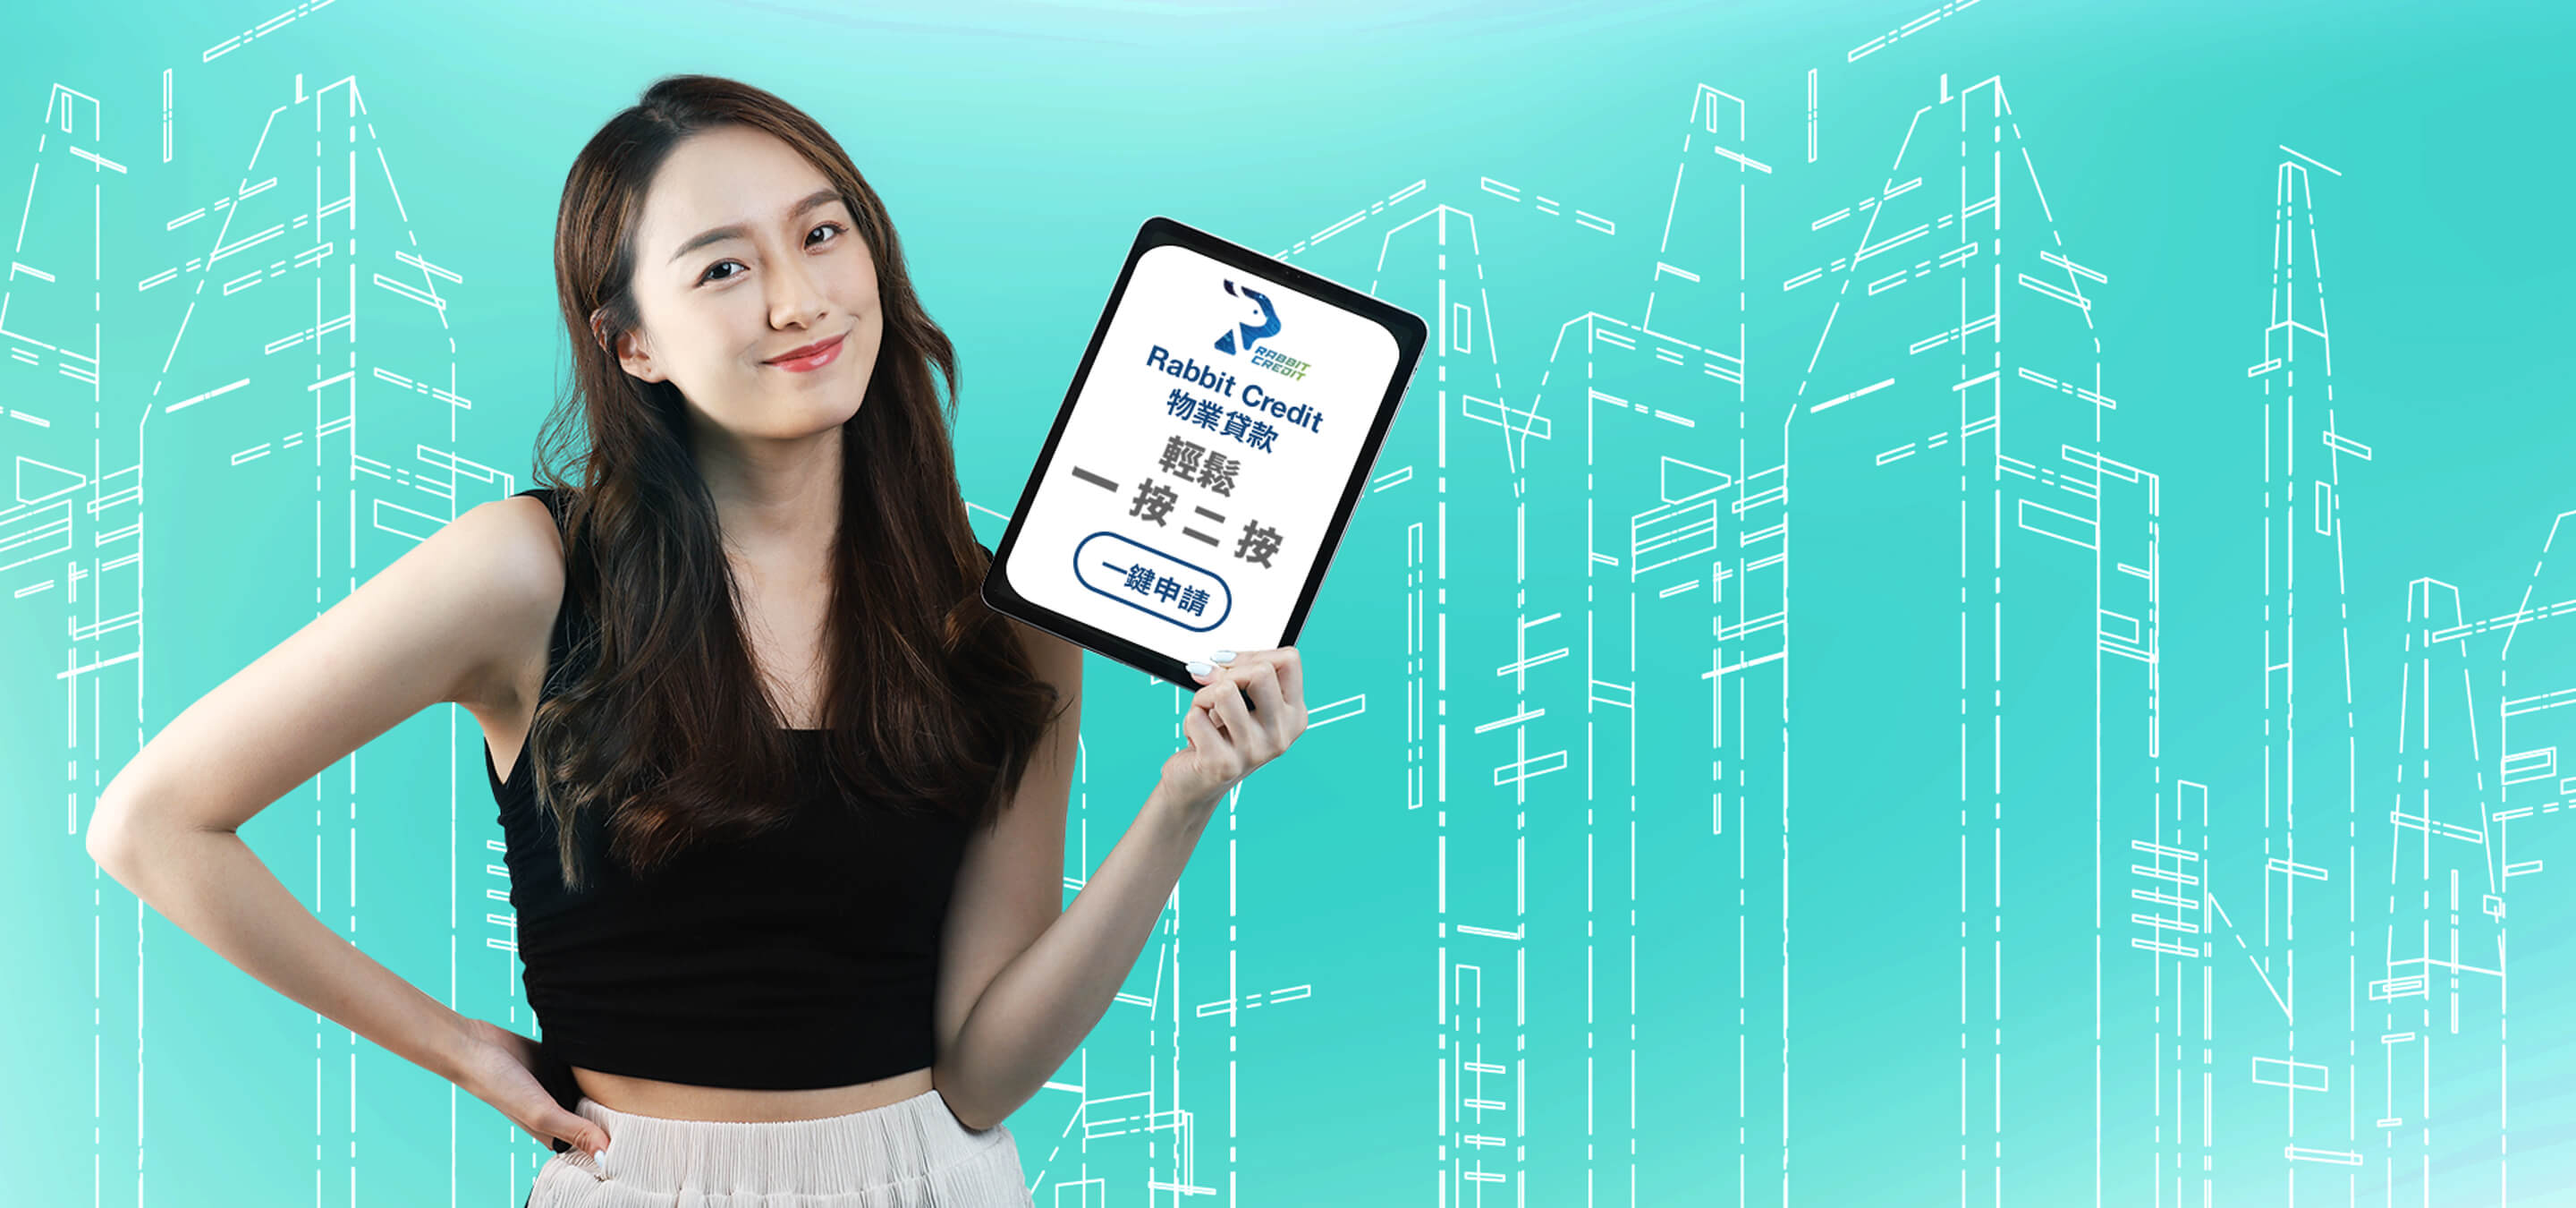 Girl holding a tablet showing Rabbit Credit Application Process